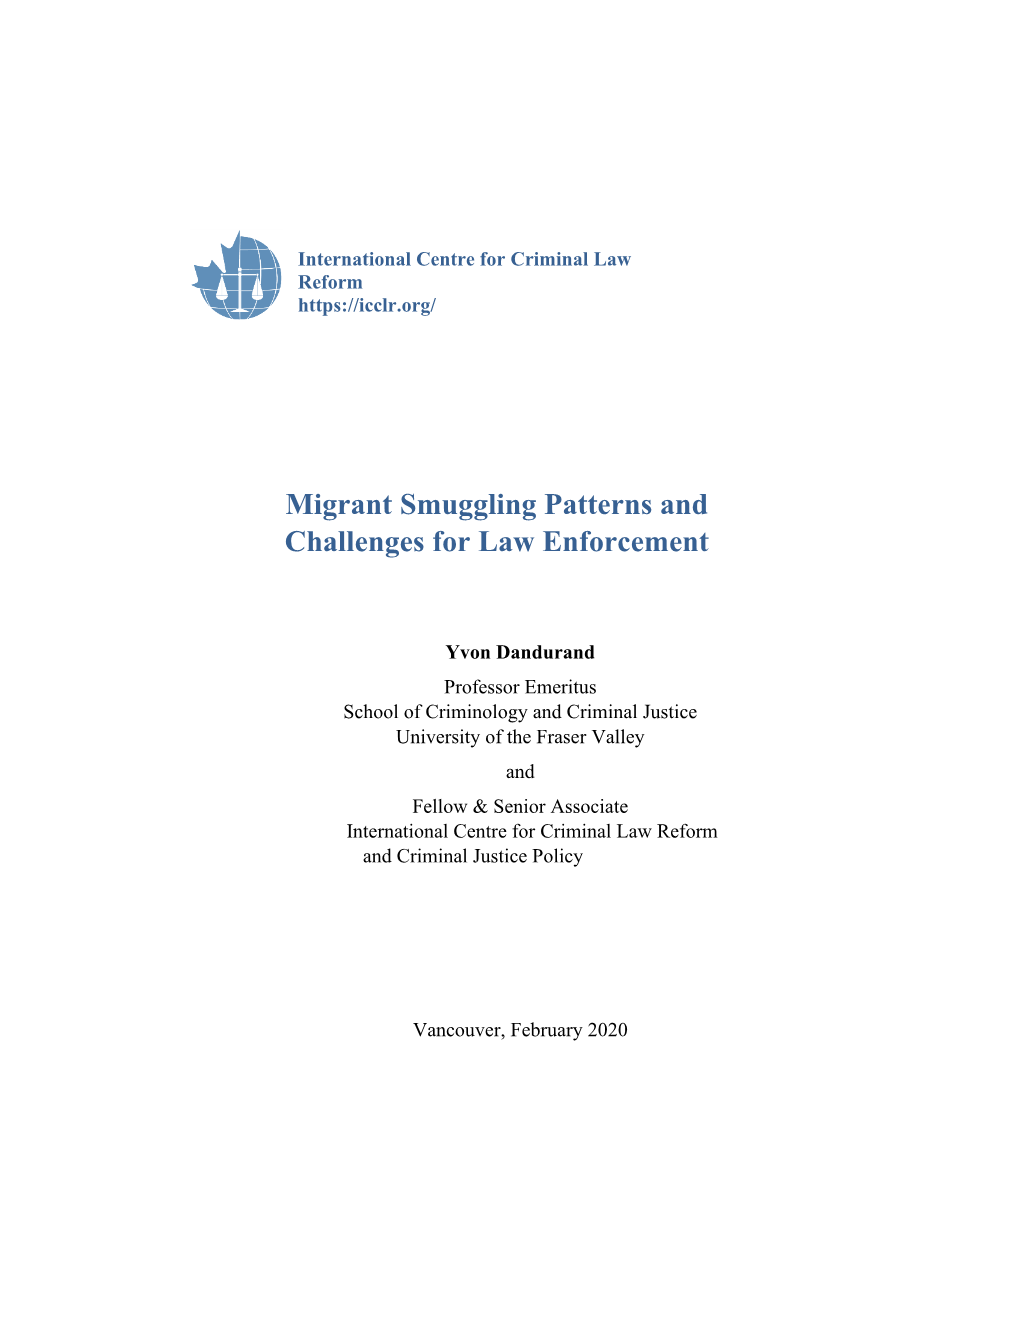 Migrant Smuggling Networks and Their Methods